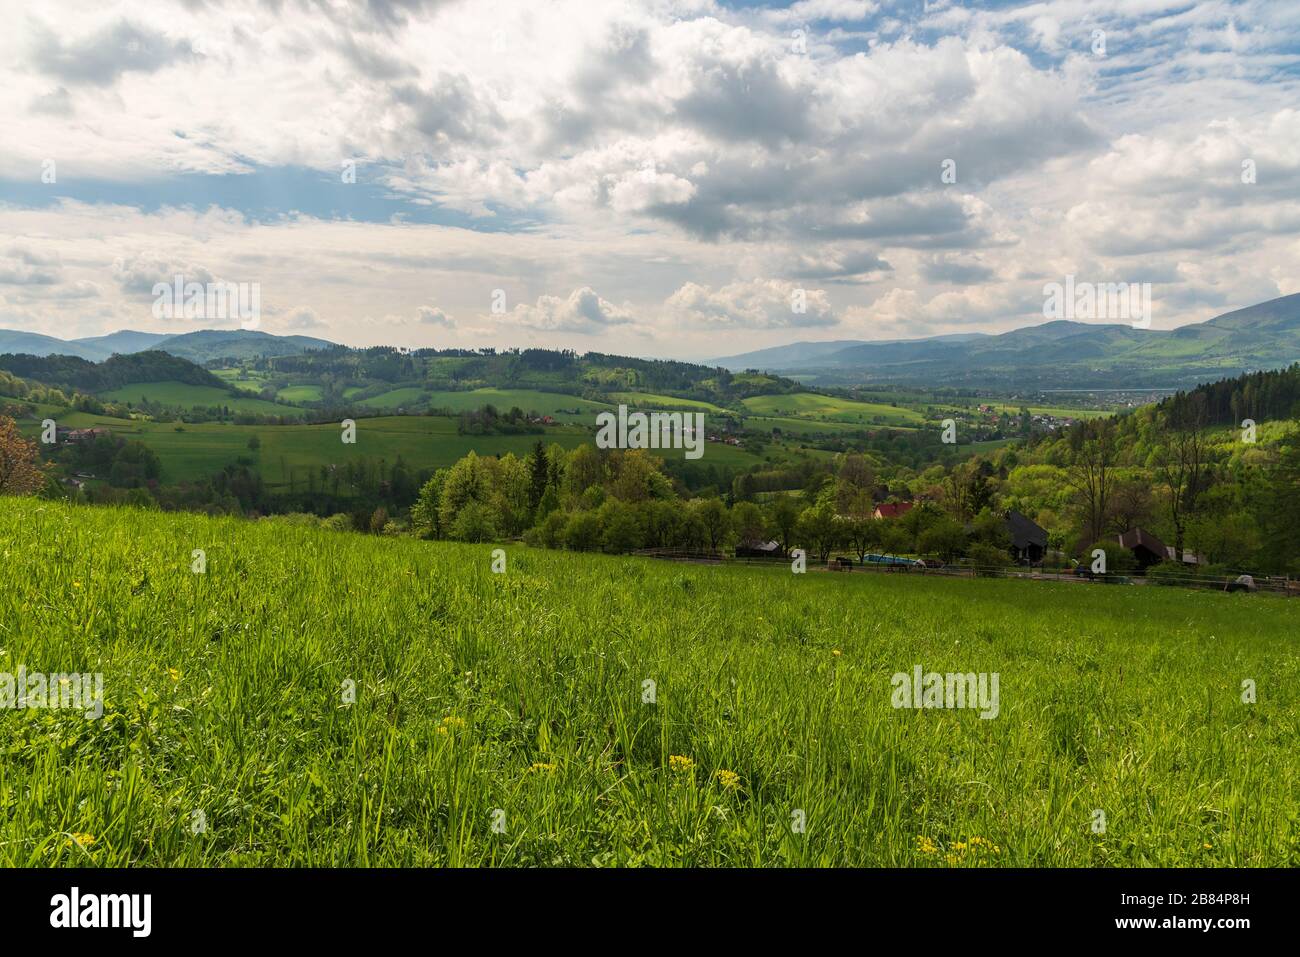 rolling landscape around Vendryne village in Czech republic with hills, meadows, trees, dispersed settlement and blue sky with clouds Stock Photo